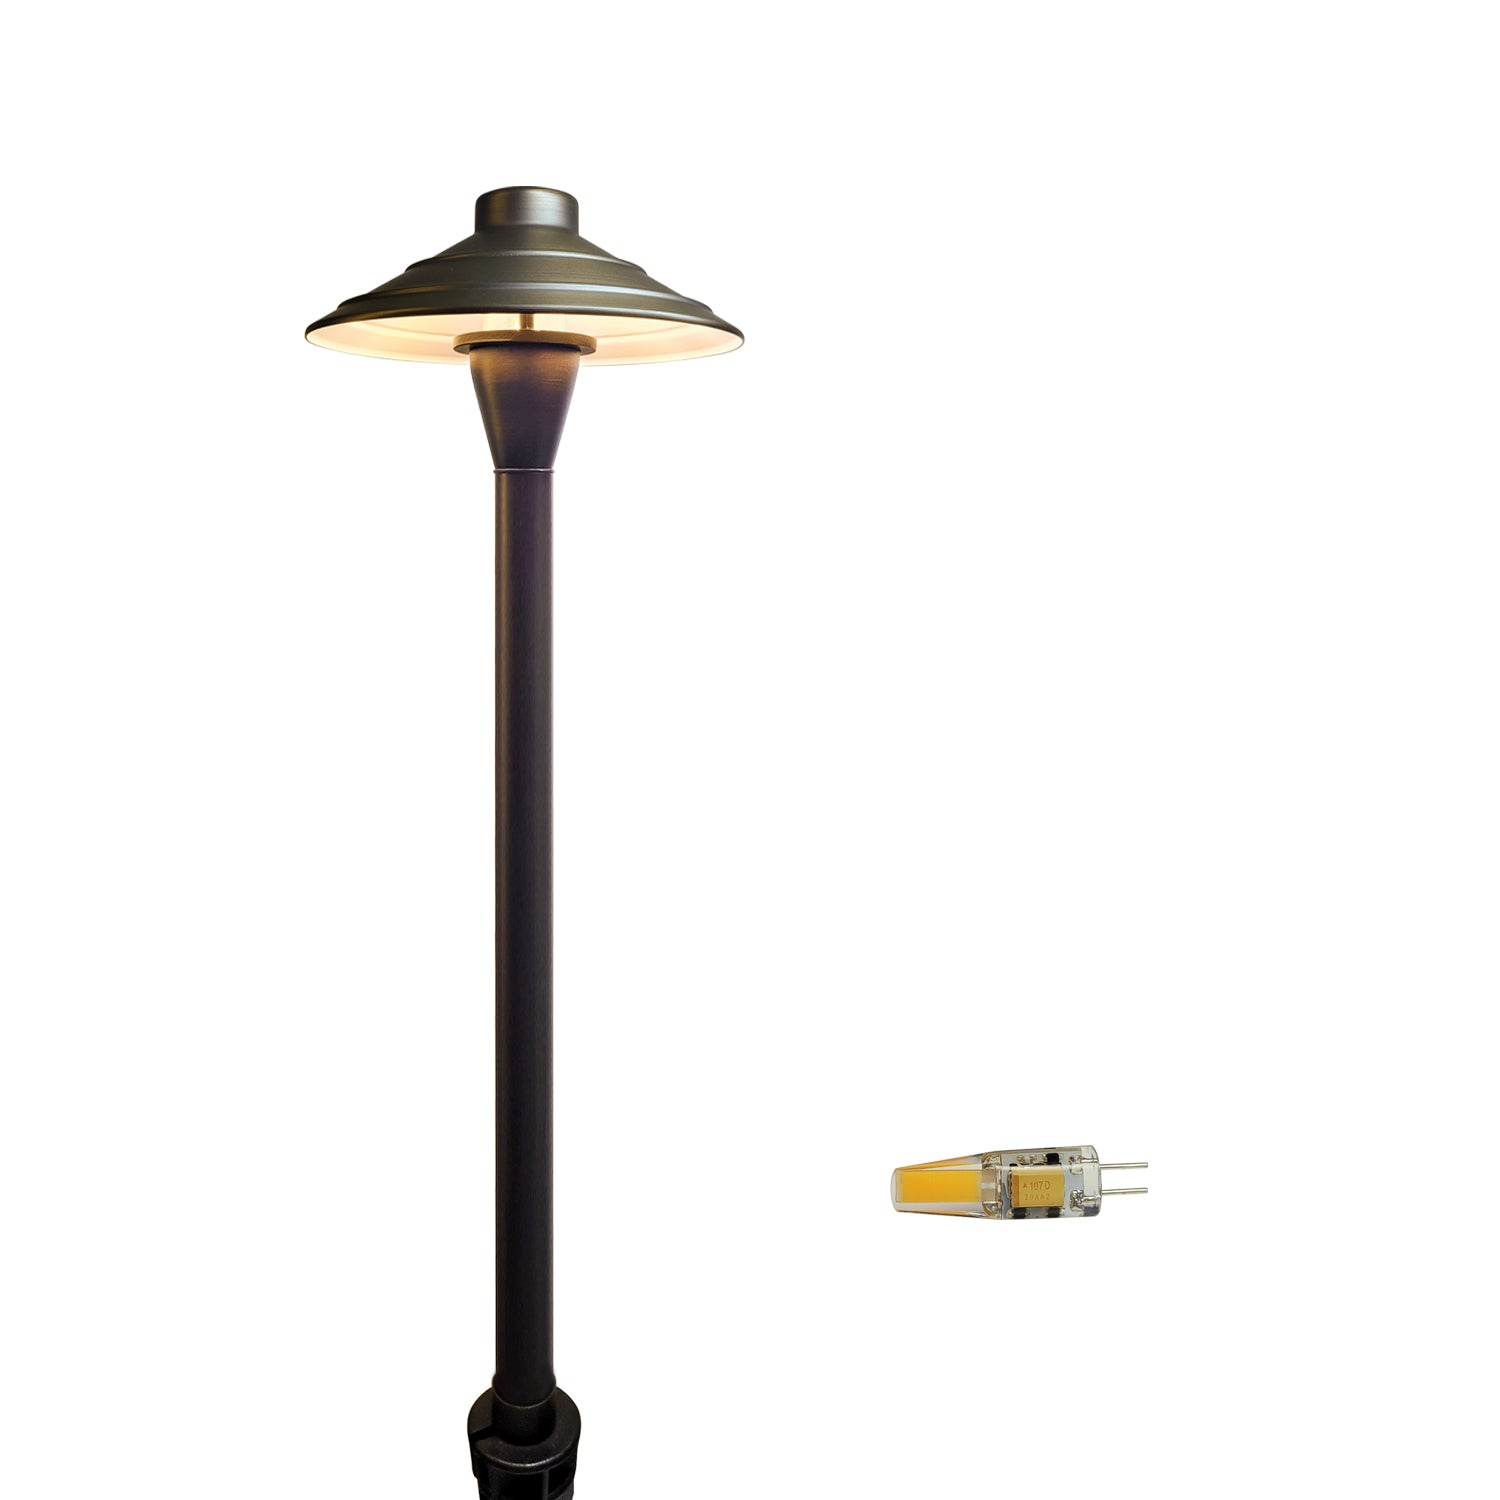 Brass outdoor garden pathway light COP601B with LED low voltage illumination and included bulb on white background